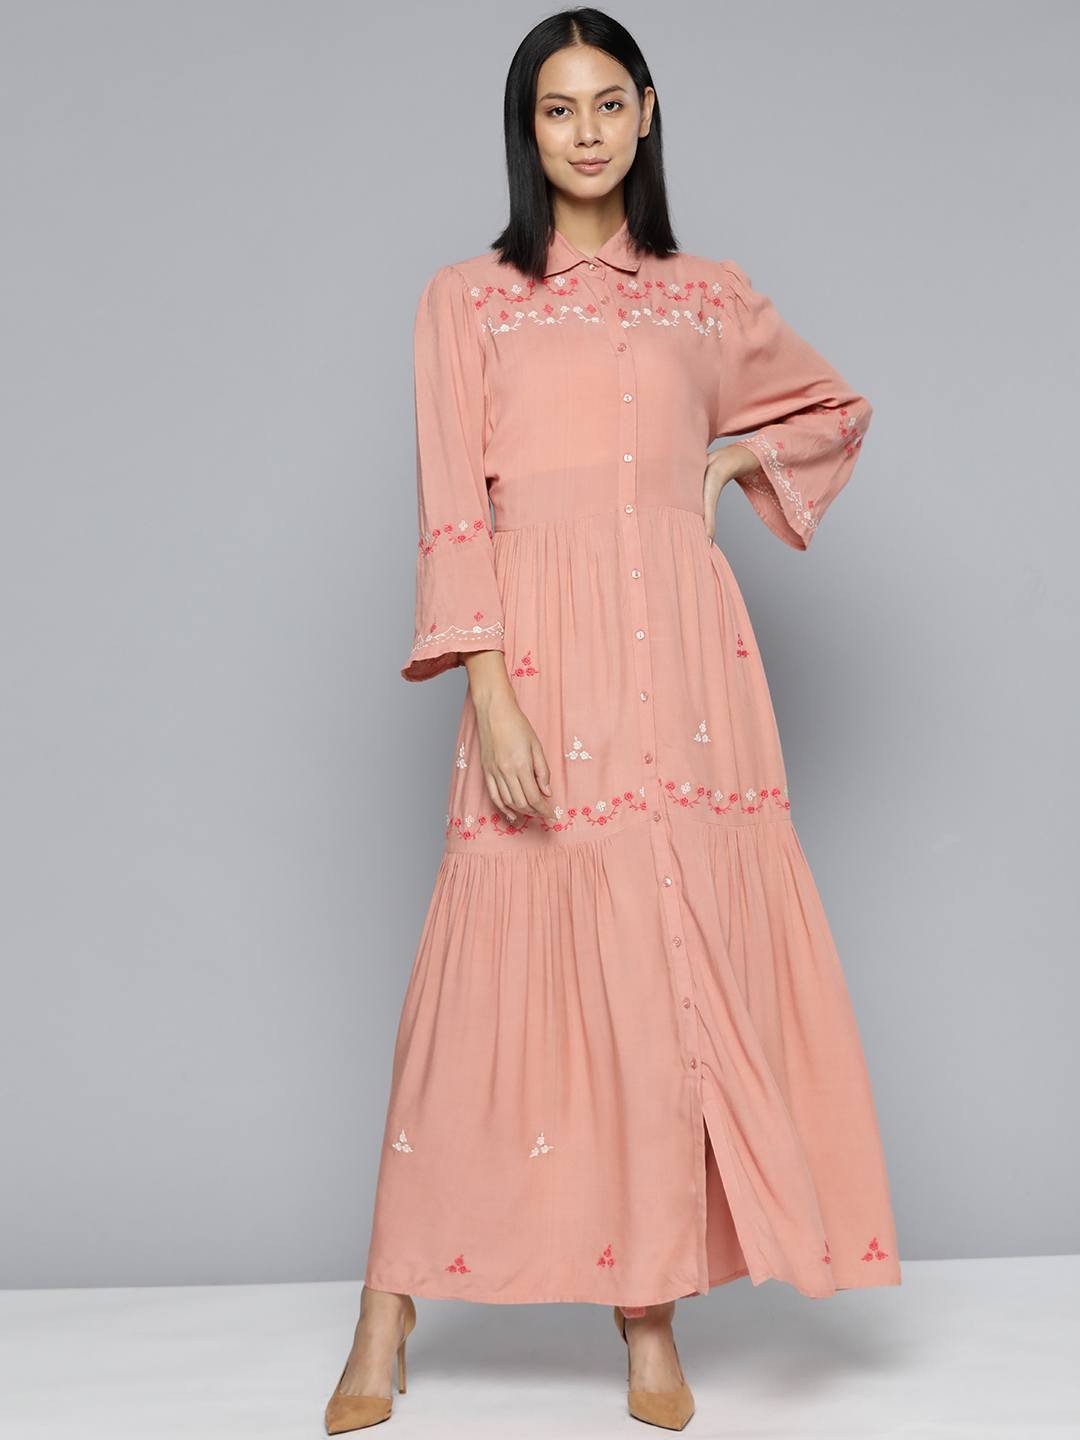 Peach Embroidered Rayon Maxi Dress